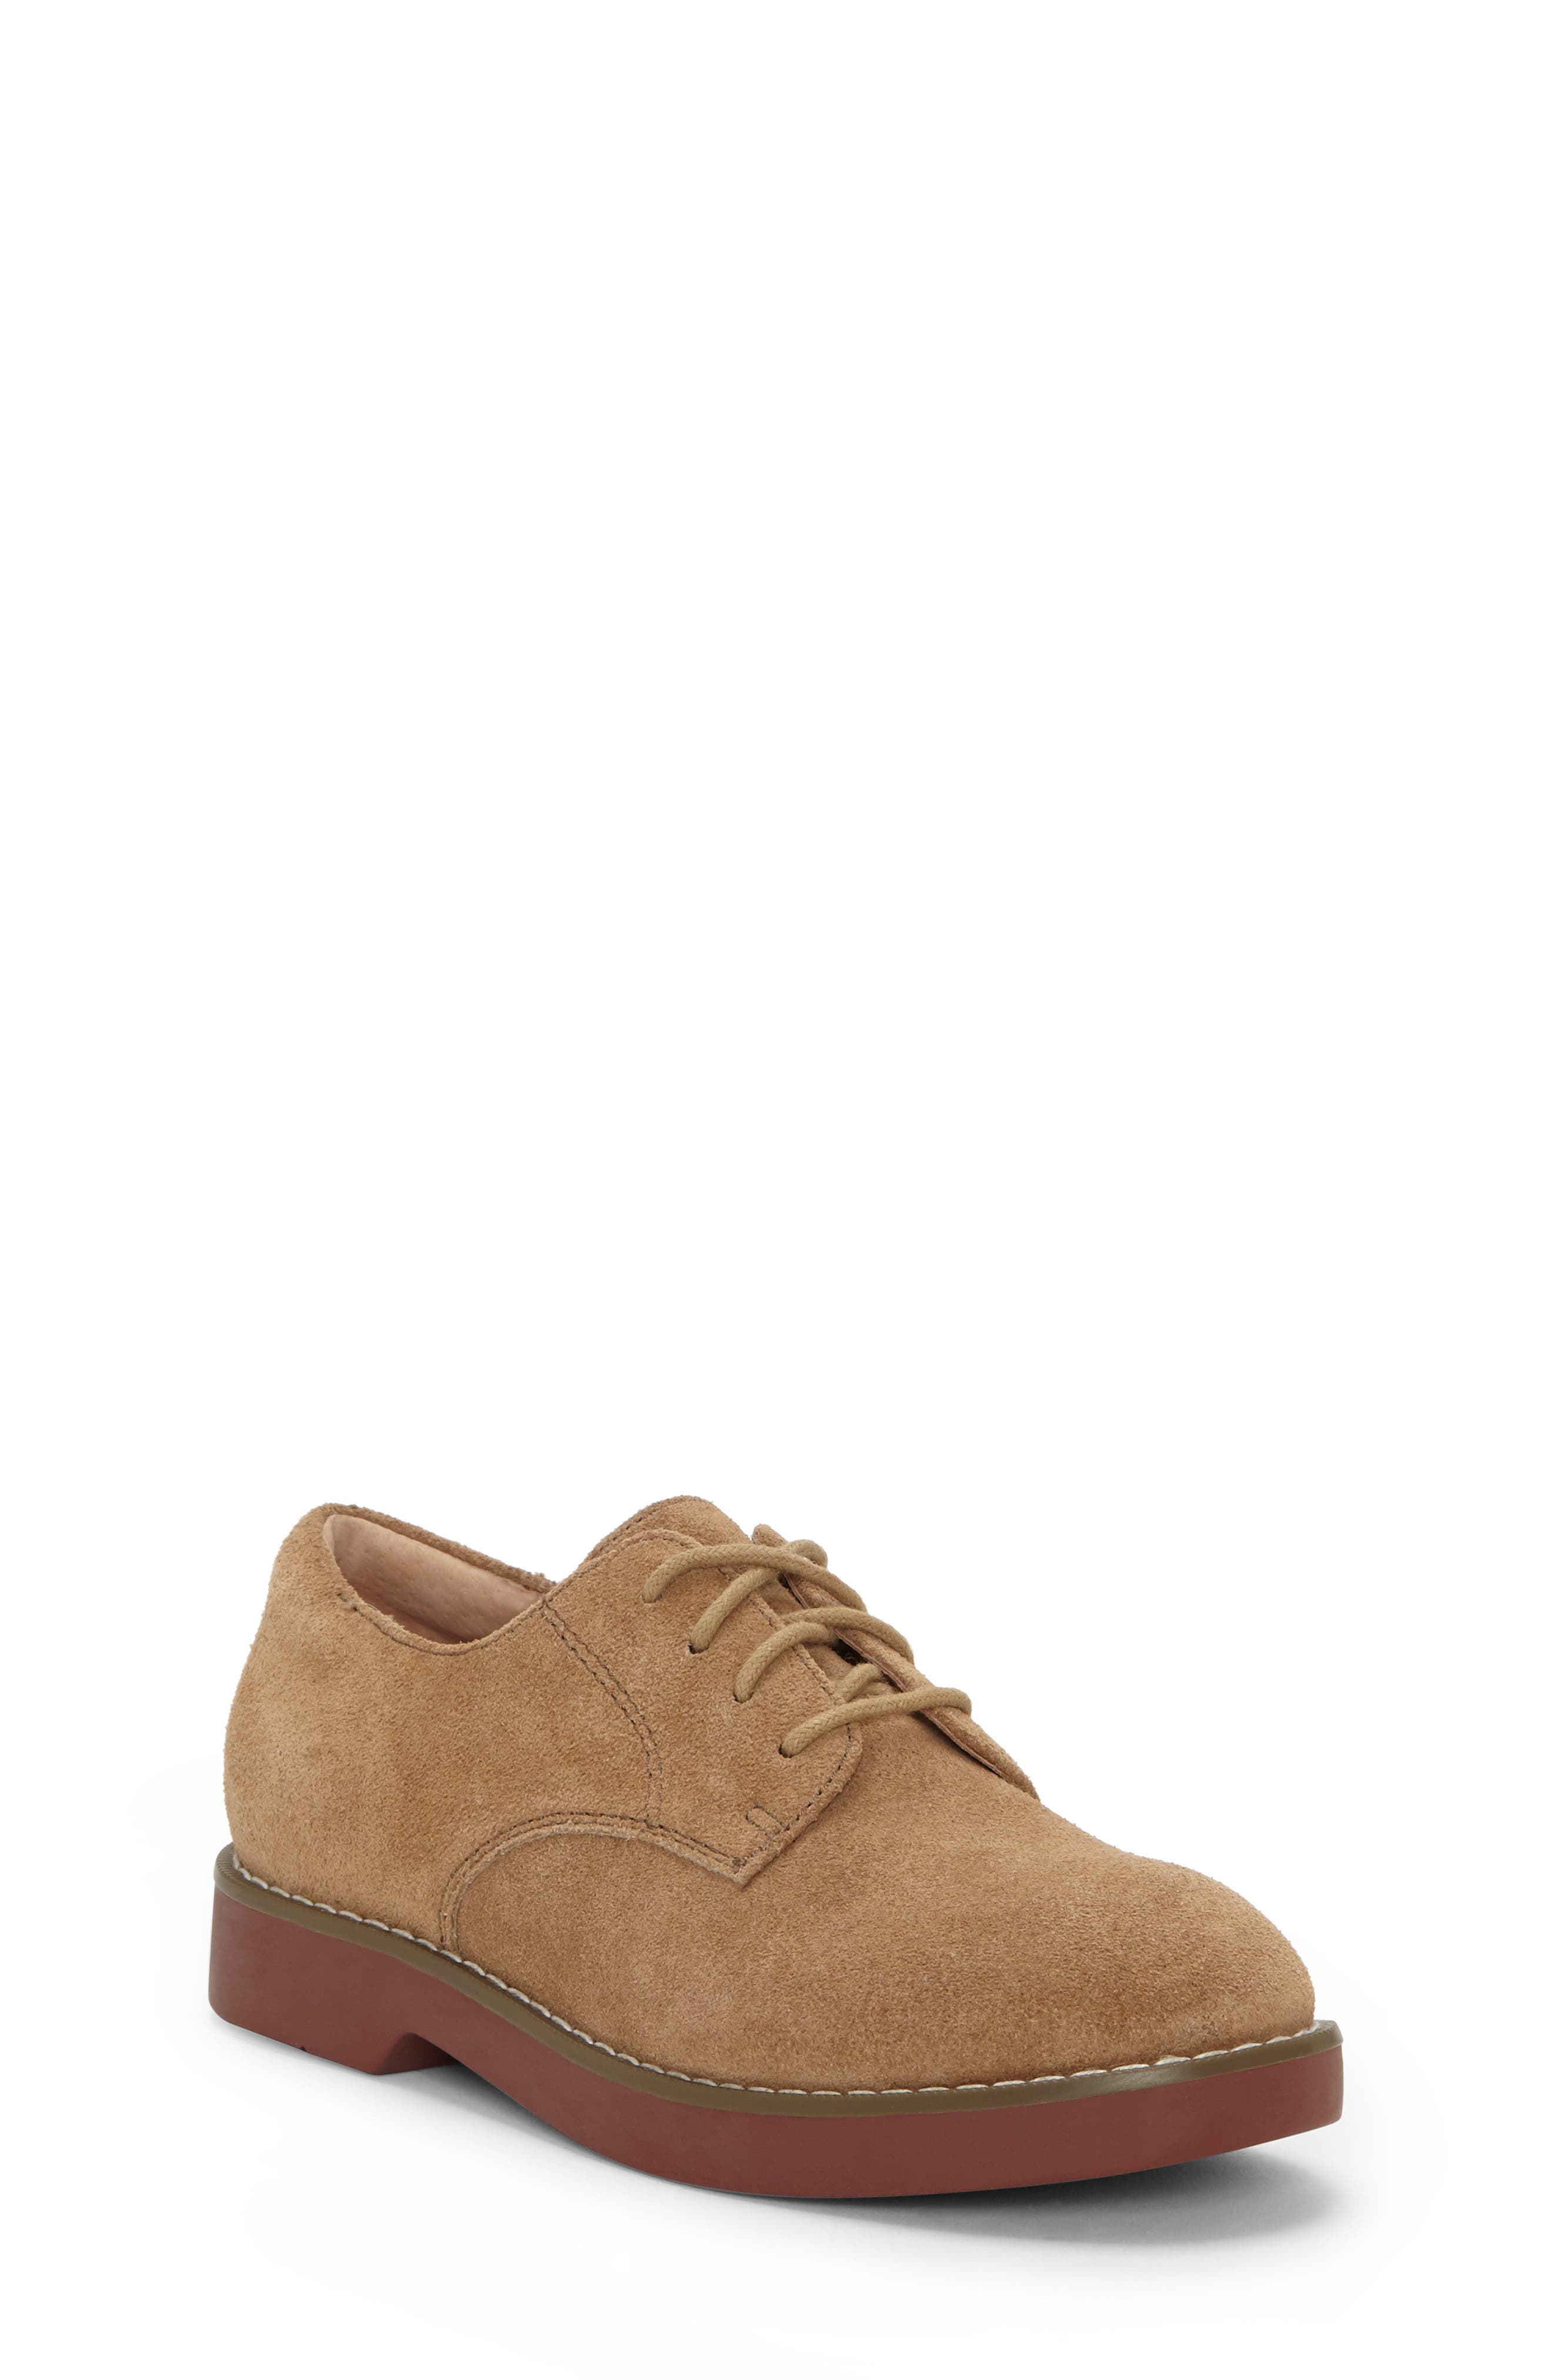 Boys Oxfords - Shoes - Kids' Shoes and Boots to Buy Online